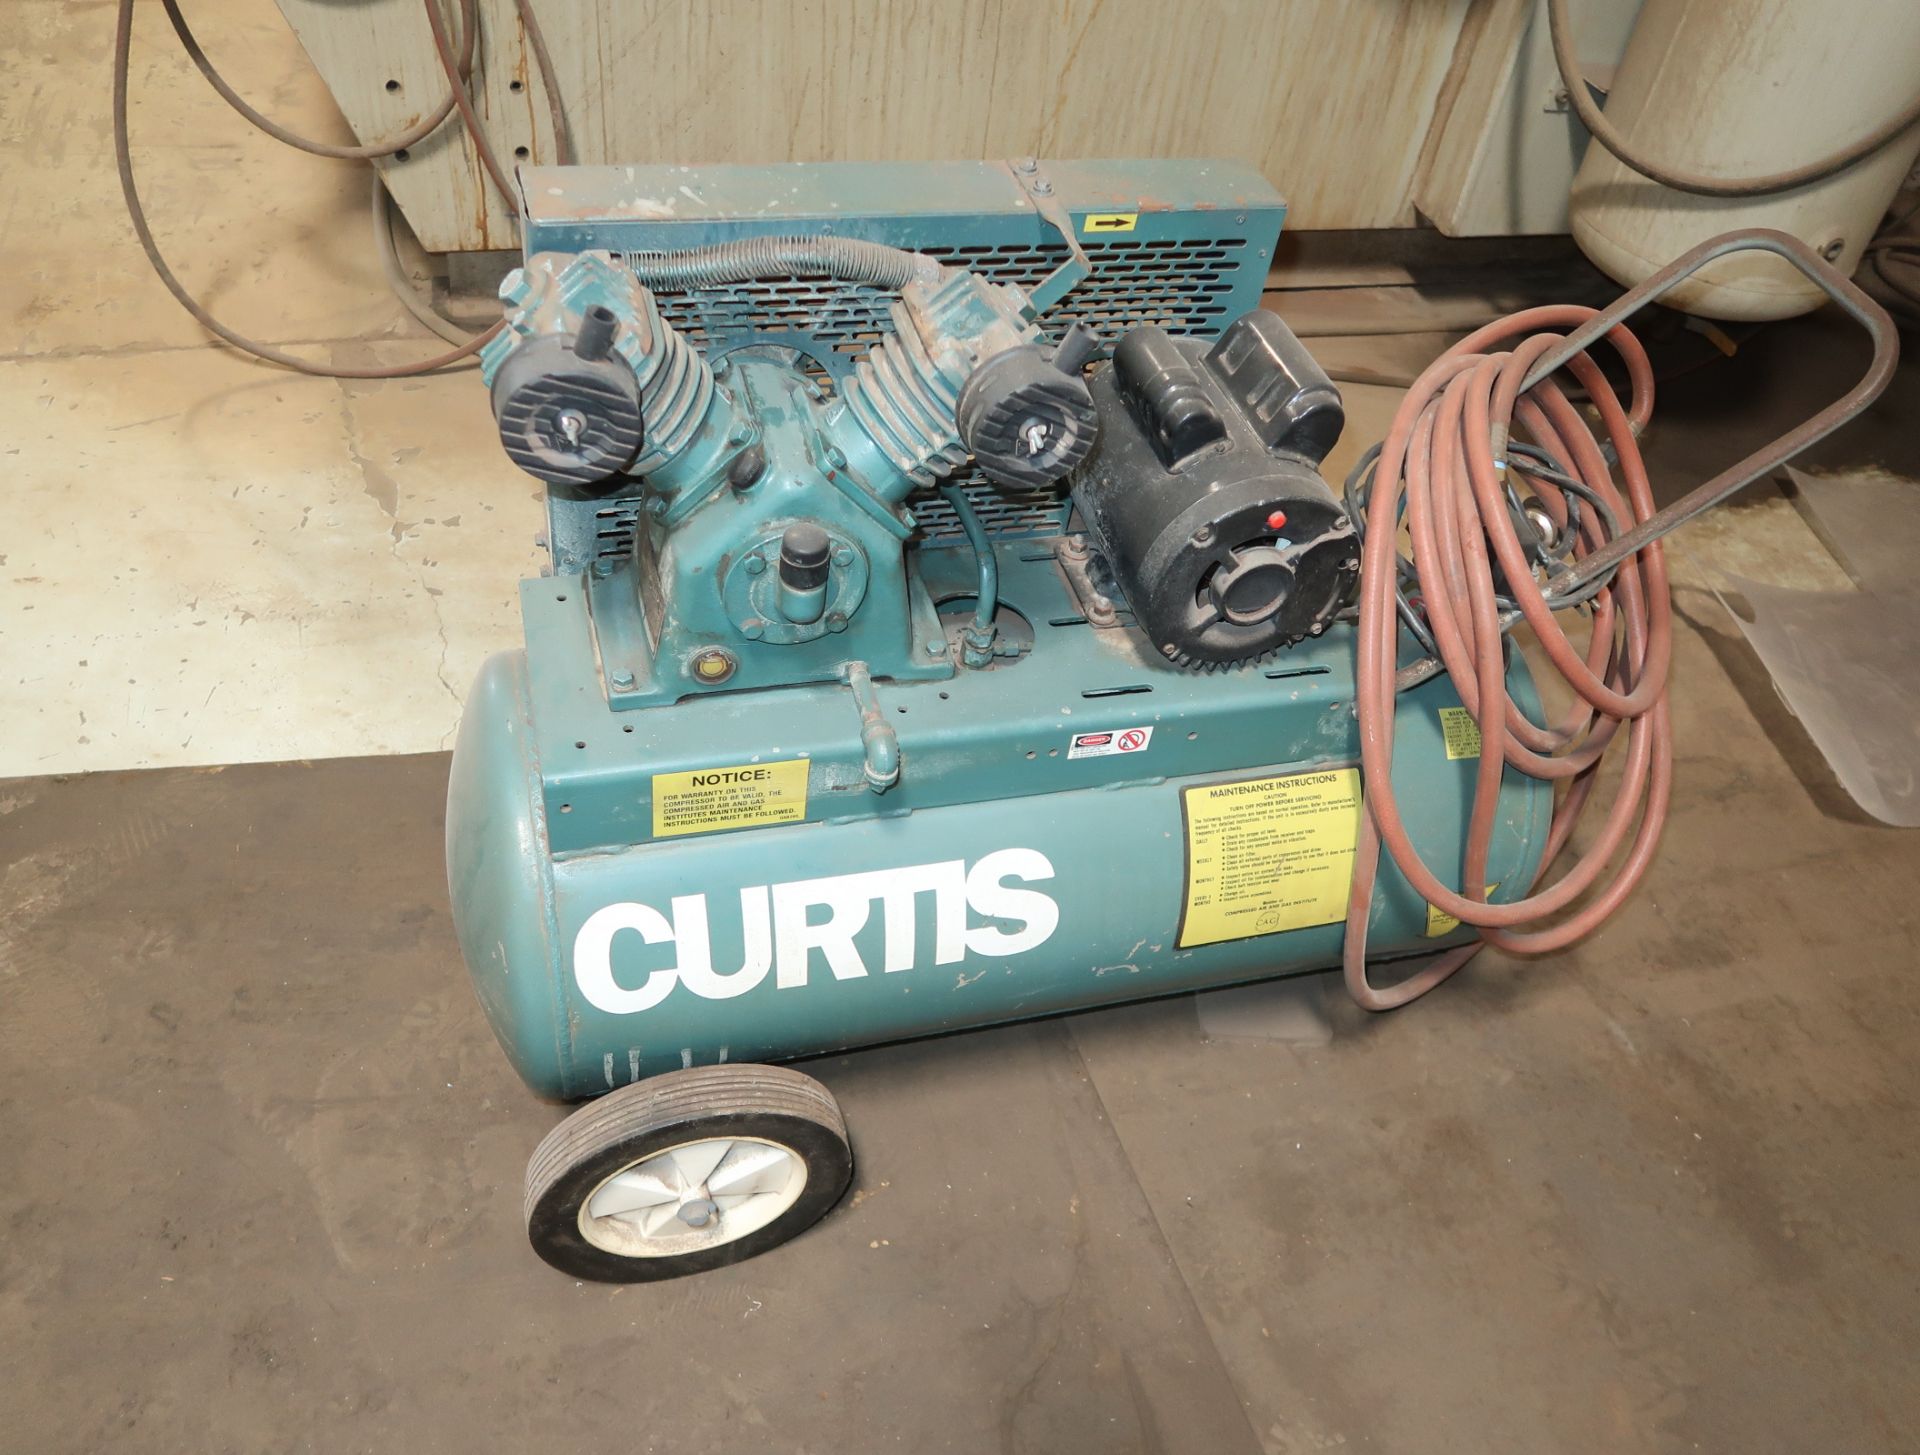 CURTIS PORTABLE ELECTRIC AIR COMPRESSOR (LOCATED AT 3201 S. 38TH ST. PHOENIX, AZ.)